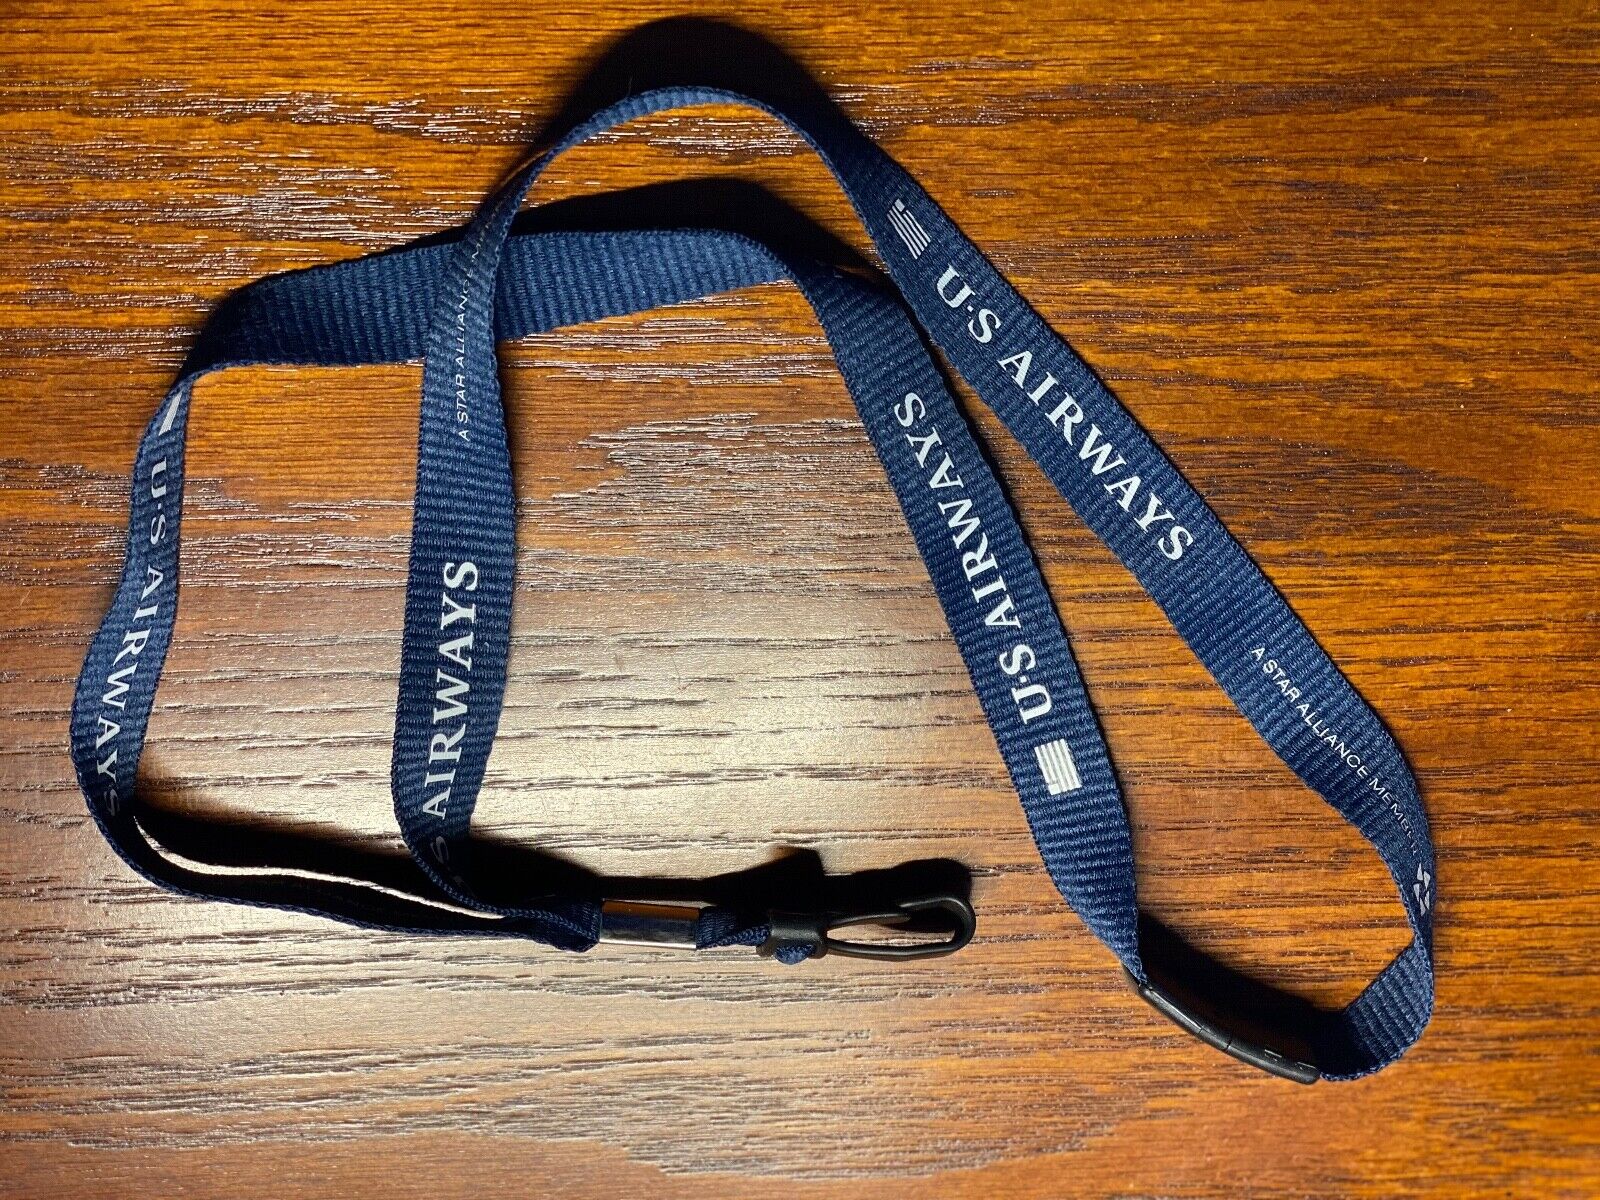 US Airways Lanyard with media clip for Badges or IDs - Great Collectable New